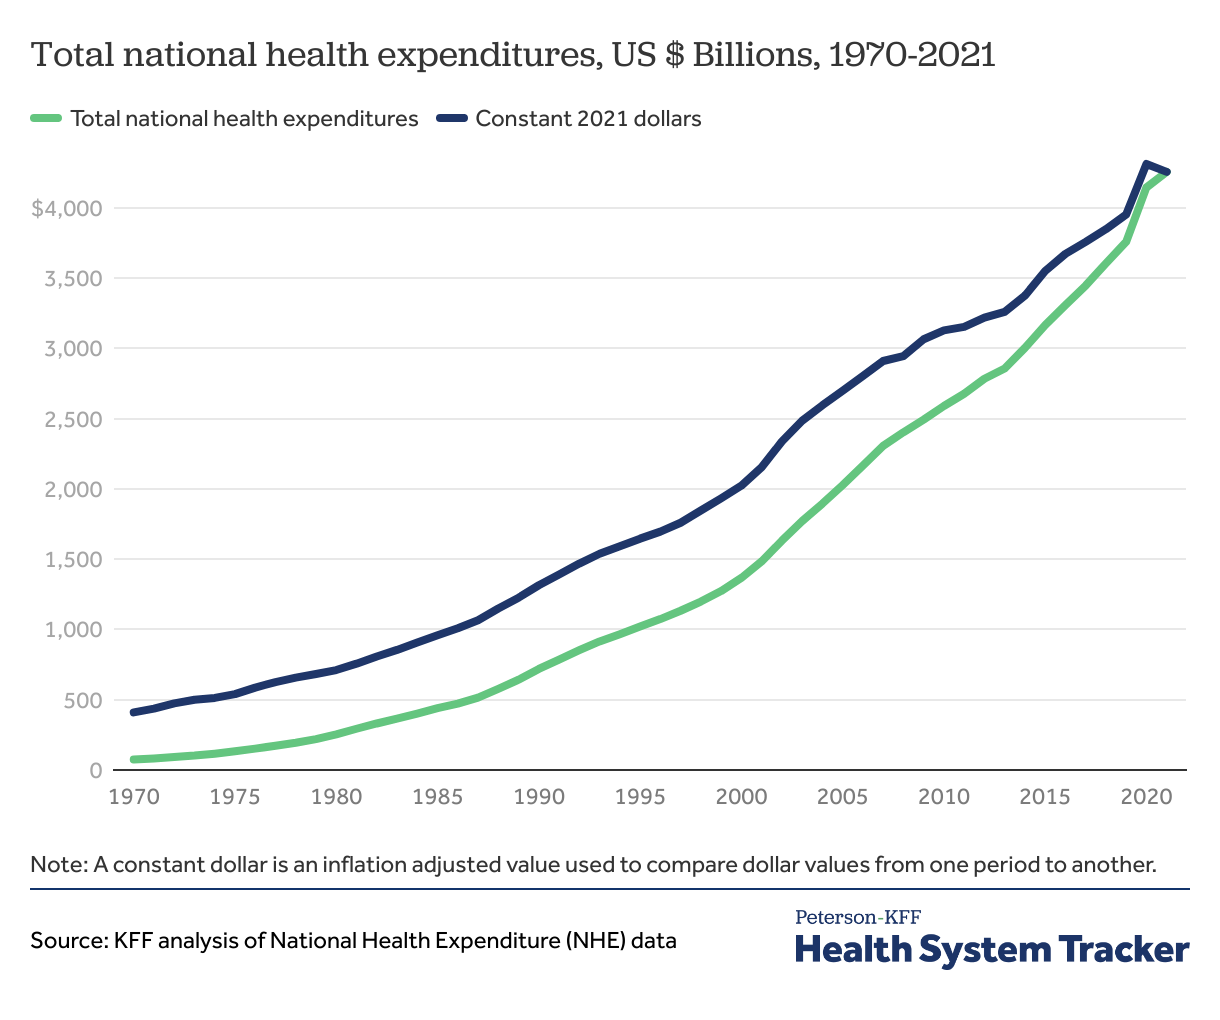 How has U.S. spending on healthcare changed over time? PetersonKFF Health System Tracker